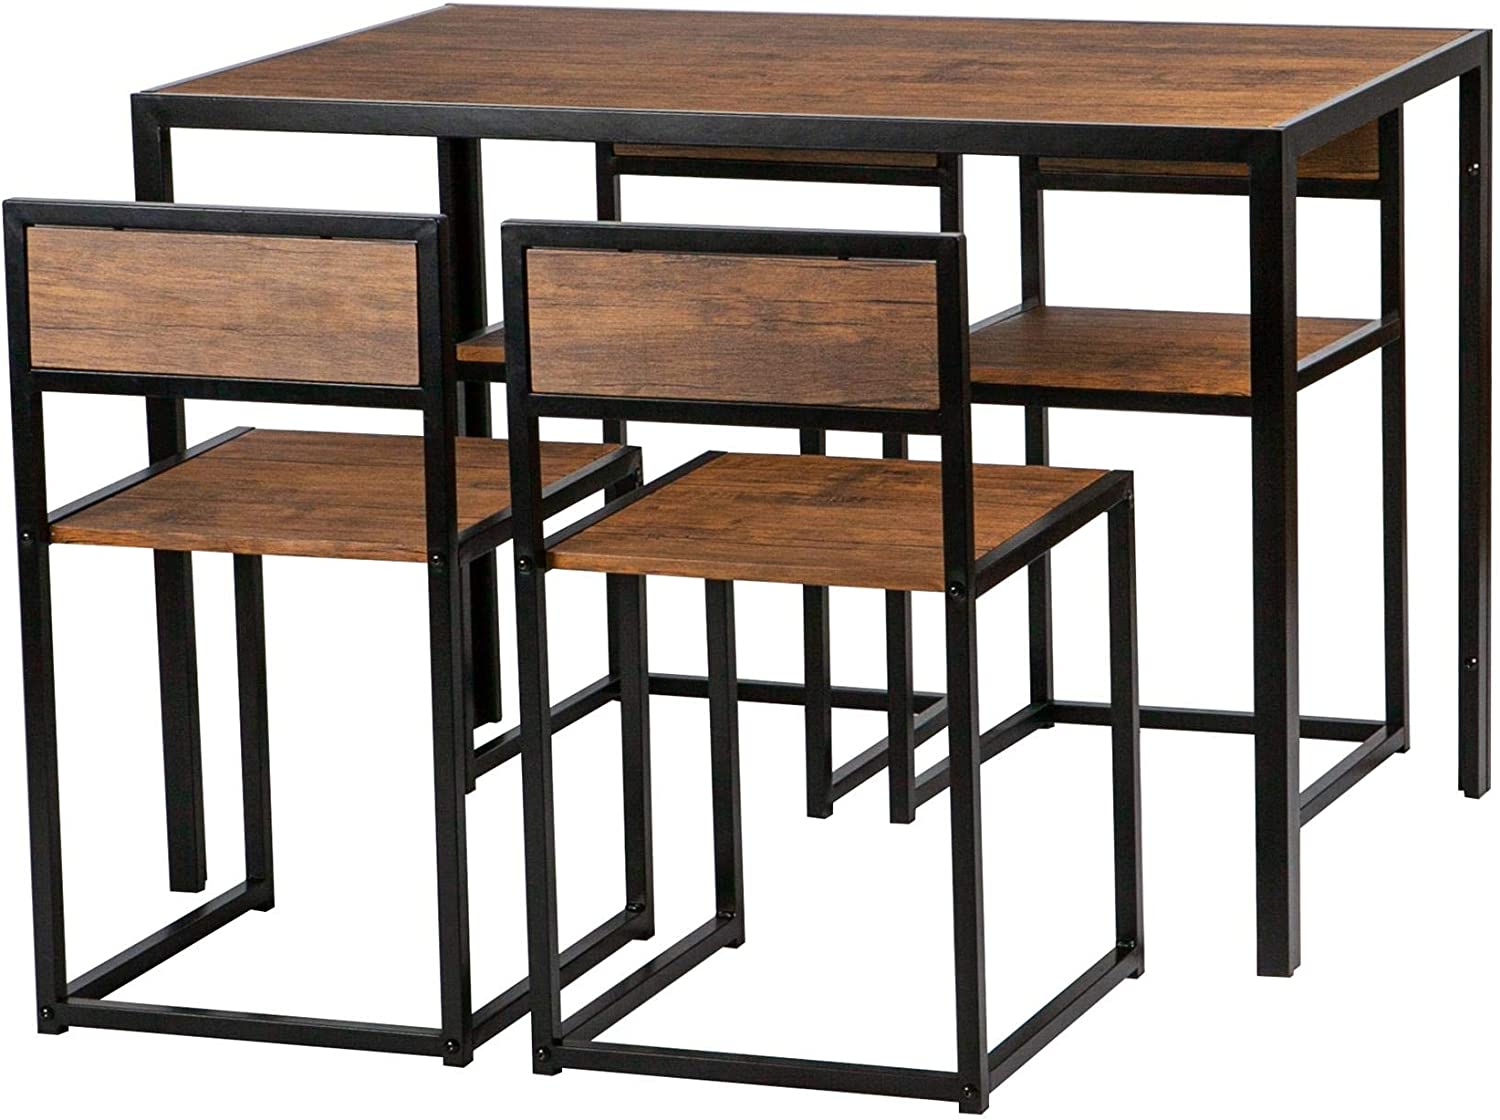 Dark Wood Compact Modern Style Space Saving Kitchen Unit Harbour Housewares 4 Person Dining Table & Chairs Set 